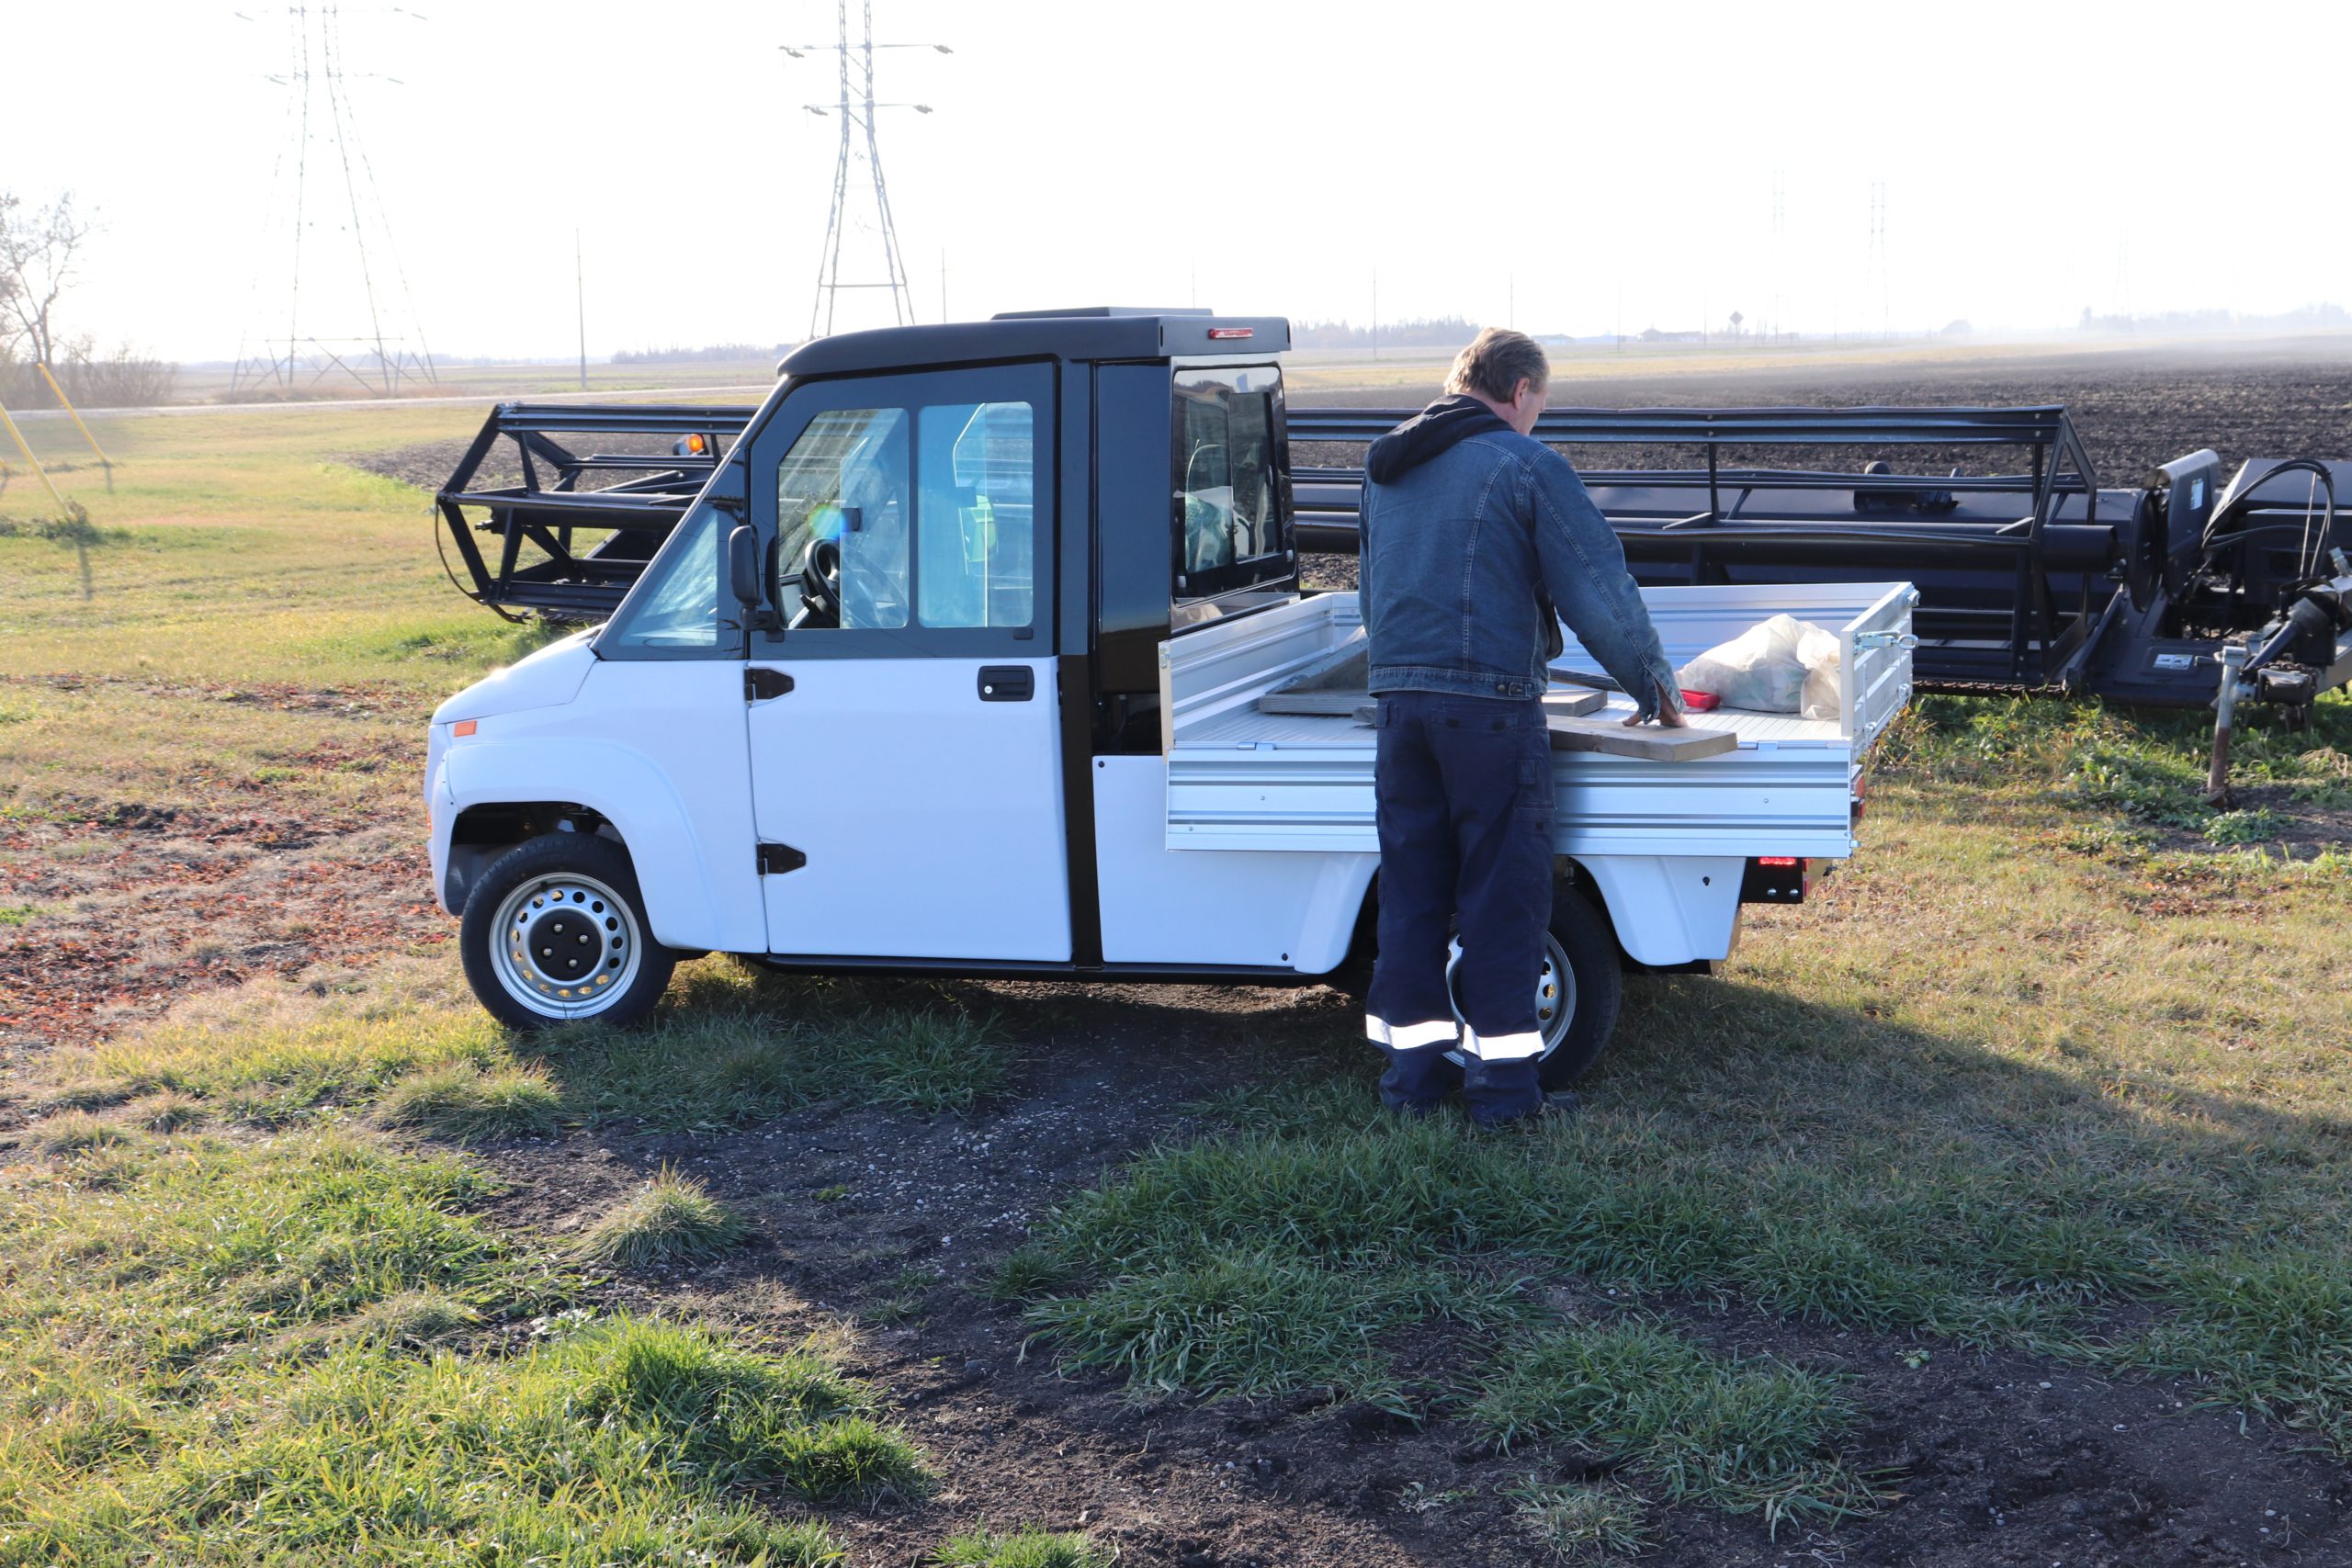 Electric Utility Vehicle on farm with person